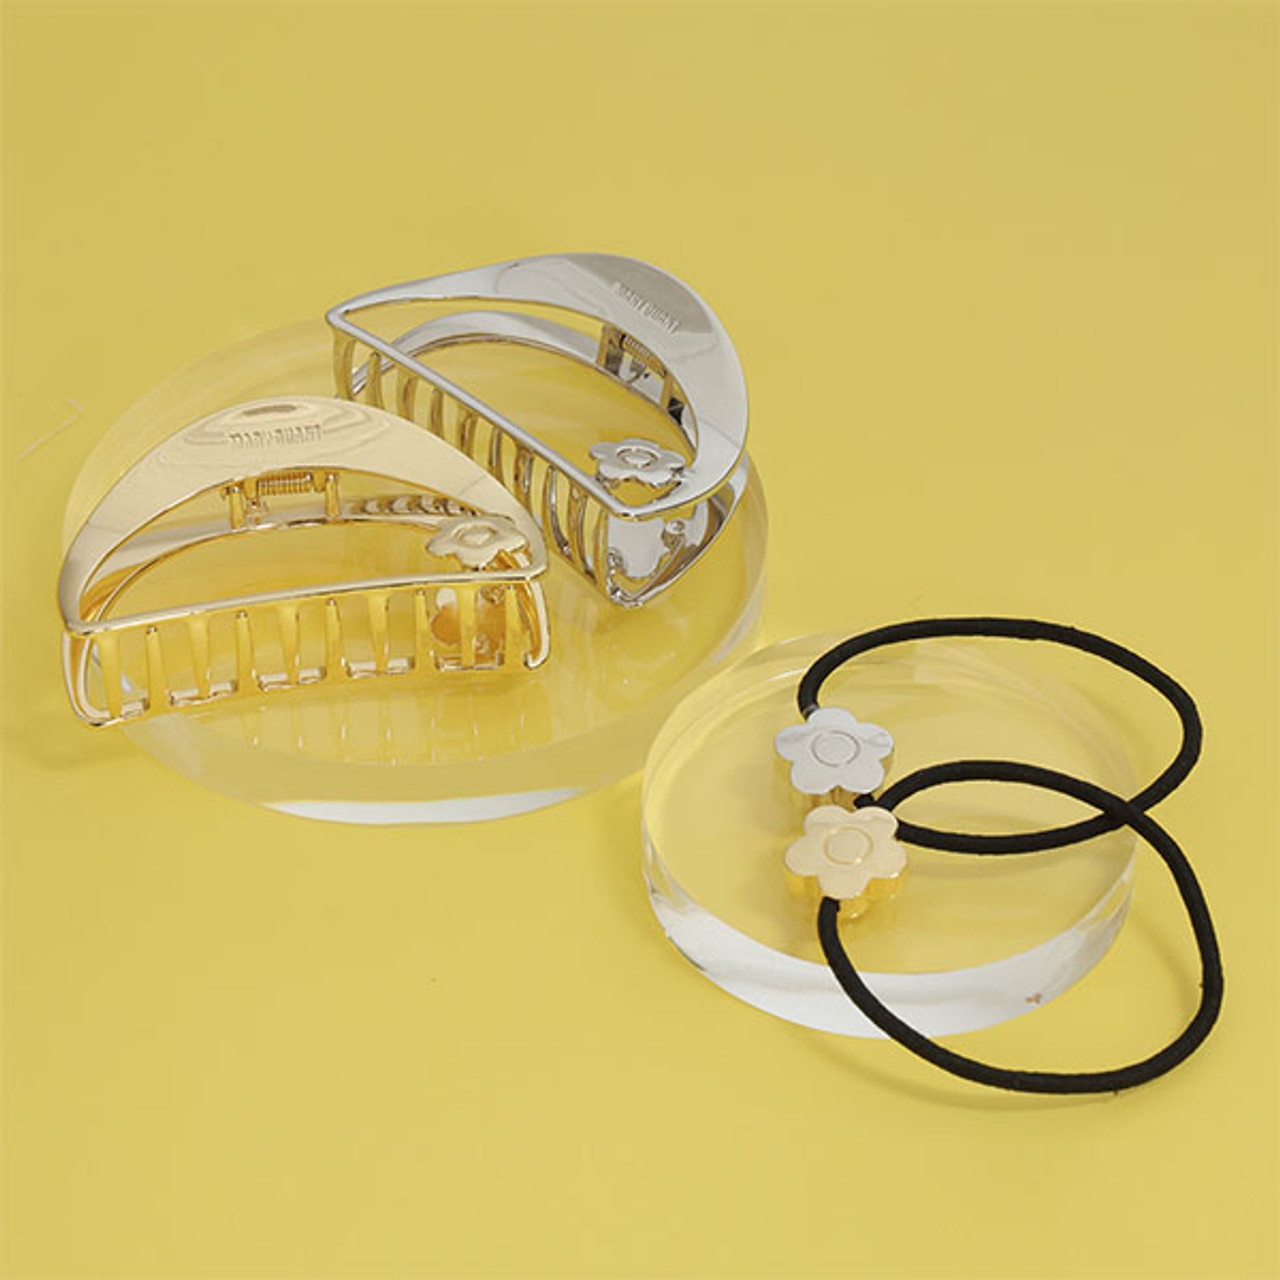 An image showing the daisy claw clips in silver and gold and the daisy hair ties in silver and gold.